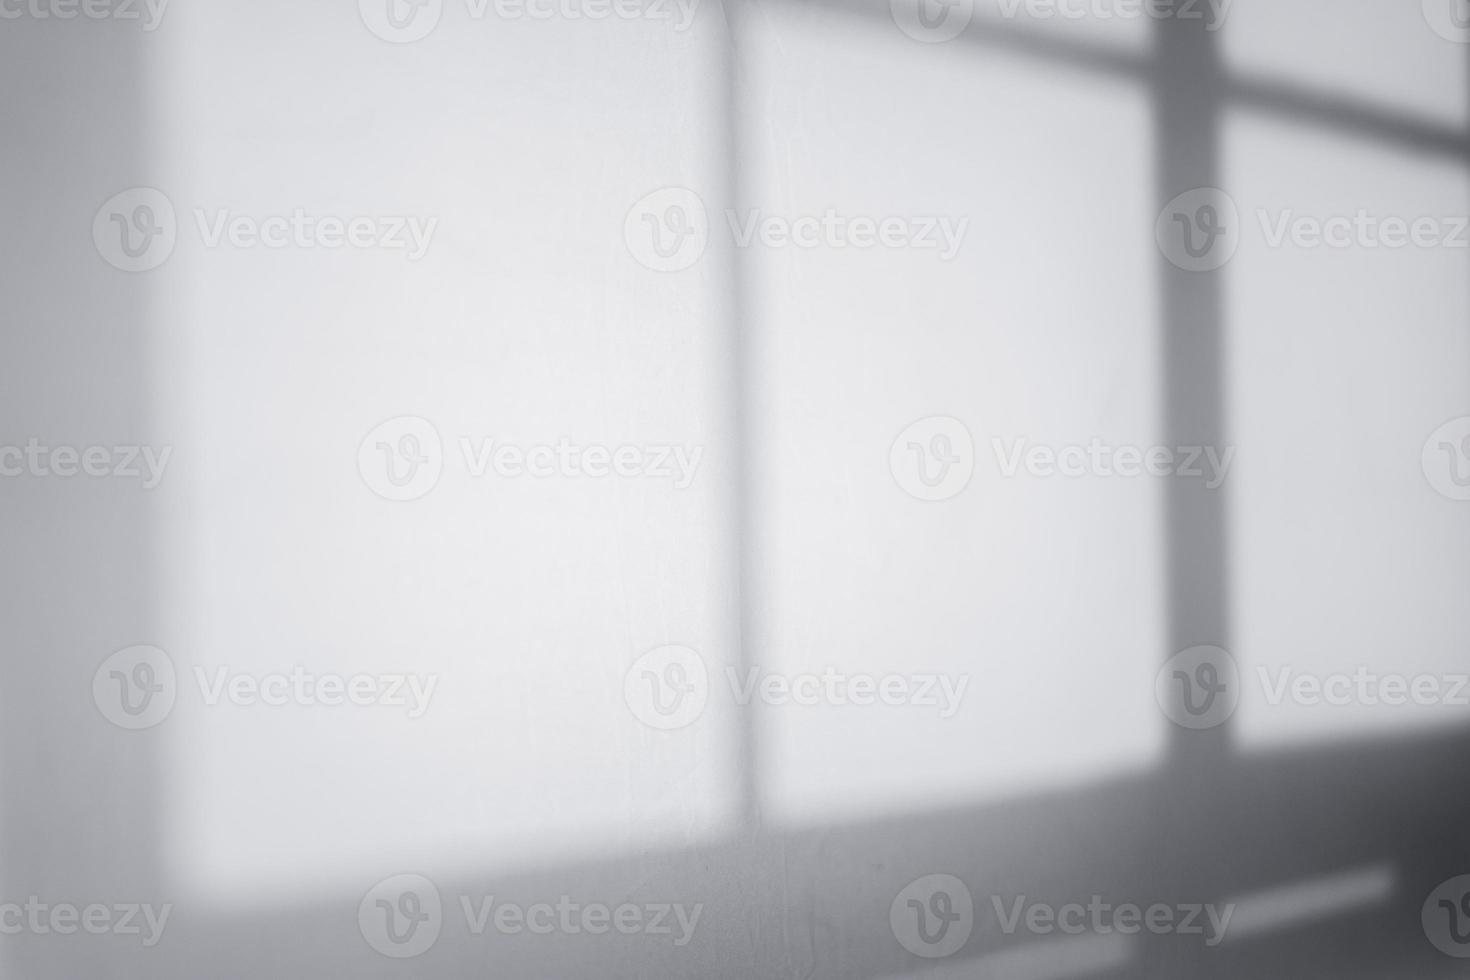 window shadow for overlay background. minimalist and elegant photo effects